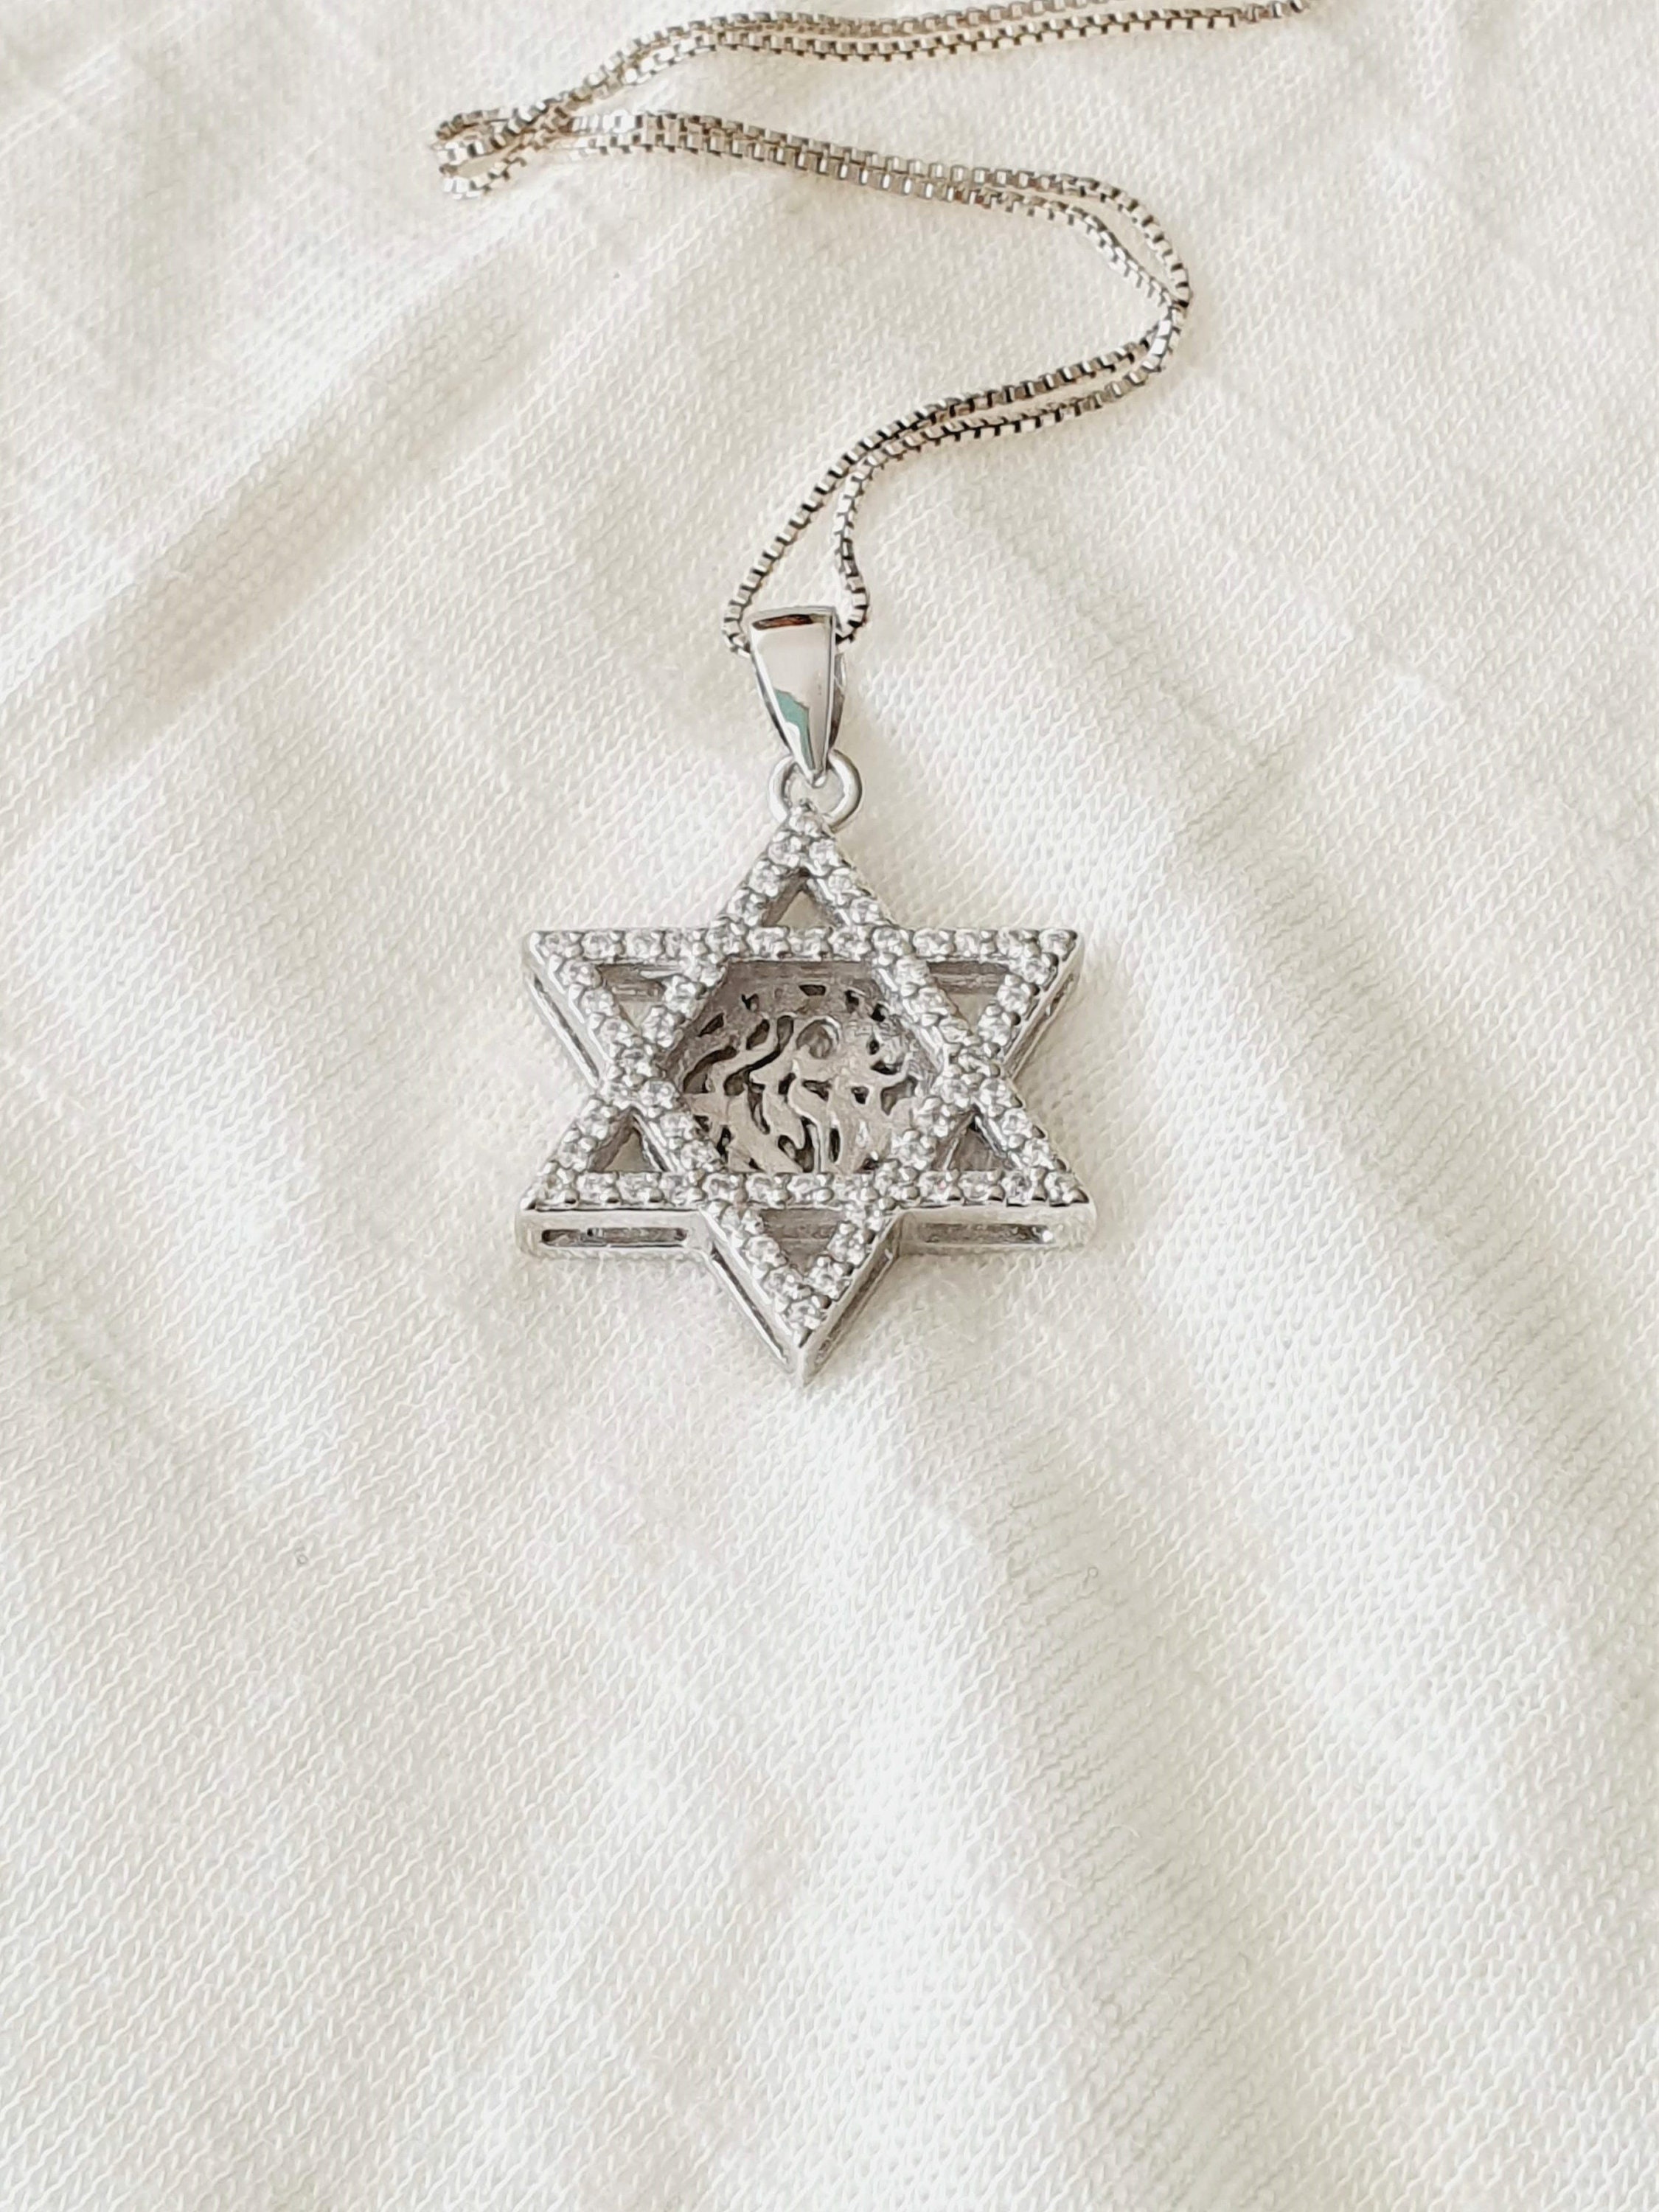 Shema Israel Star of David Pendant Necklace 925 Sterling | Etsy